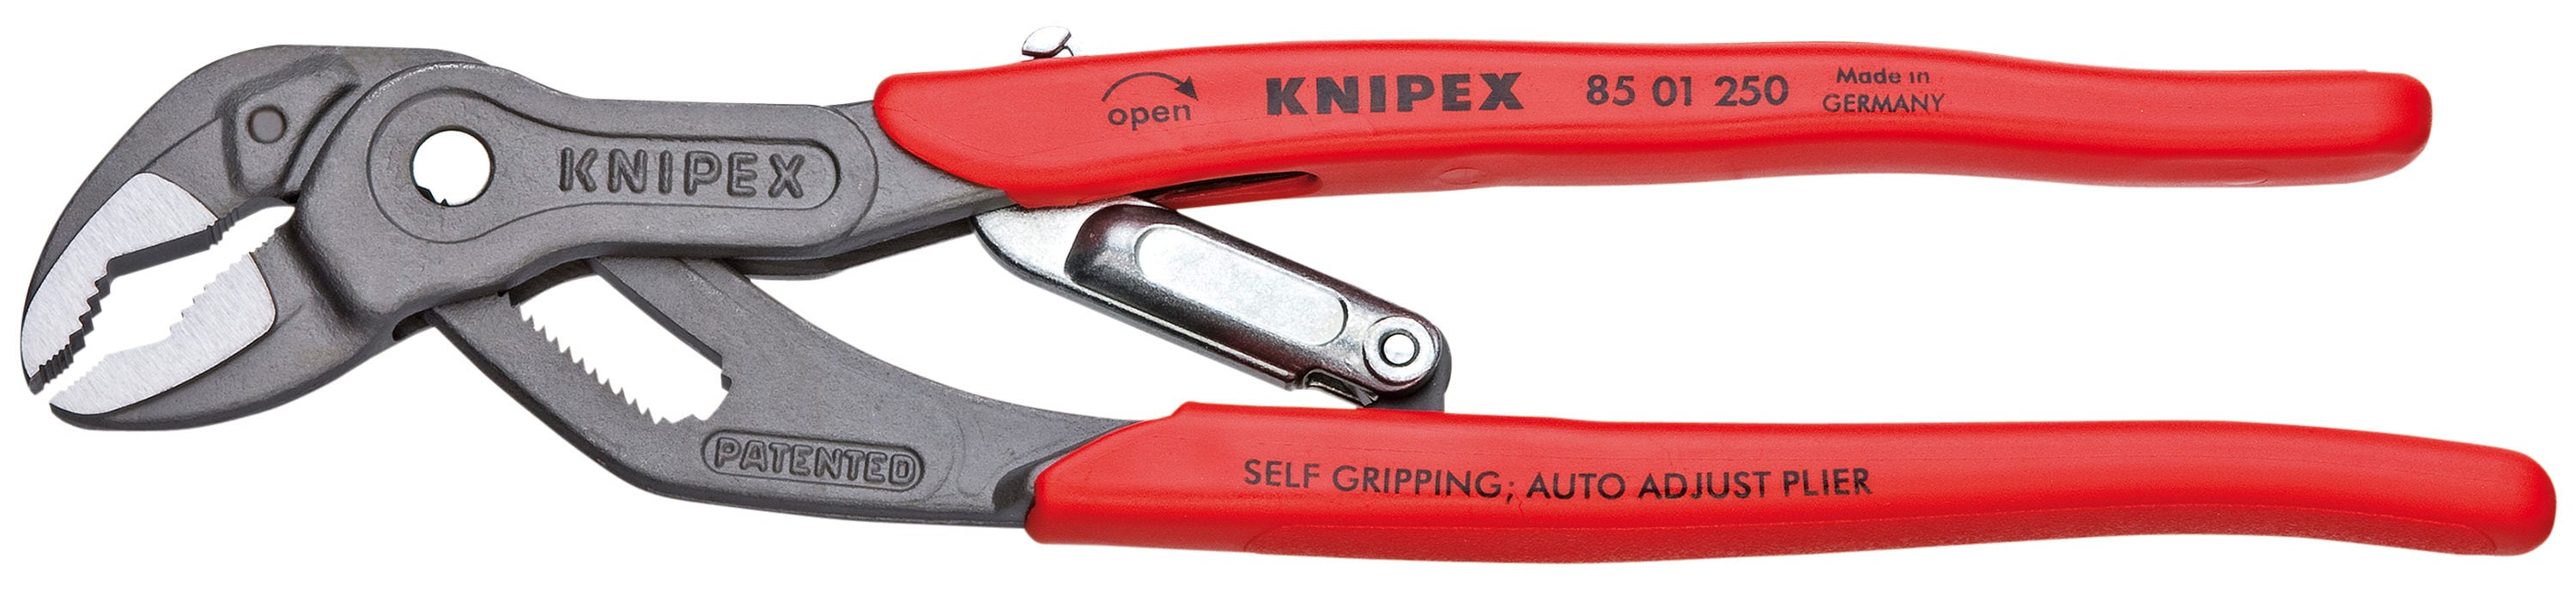 KNIPEX SmartGrip Auto Adjusting Water Pump 10-in V-jaw Pliers